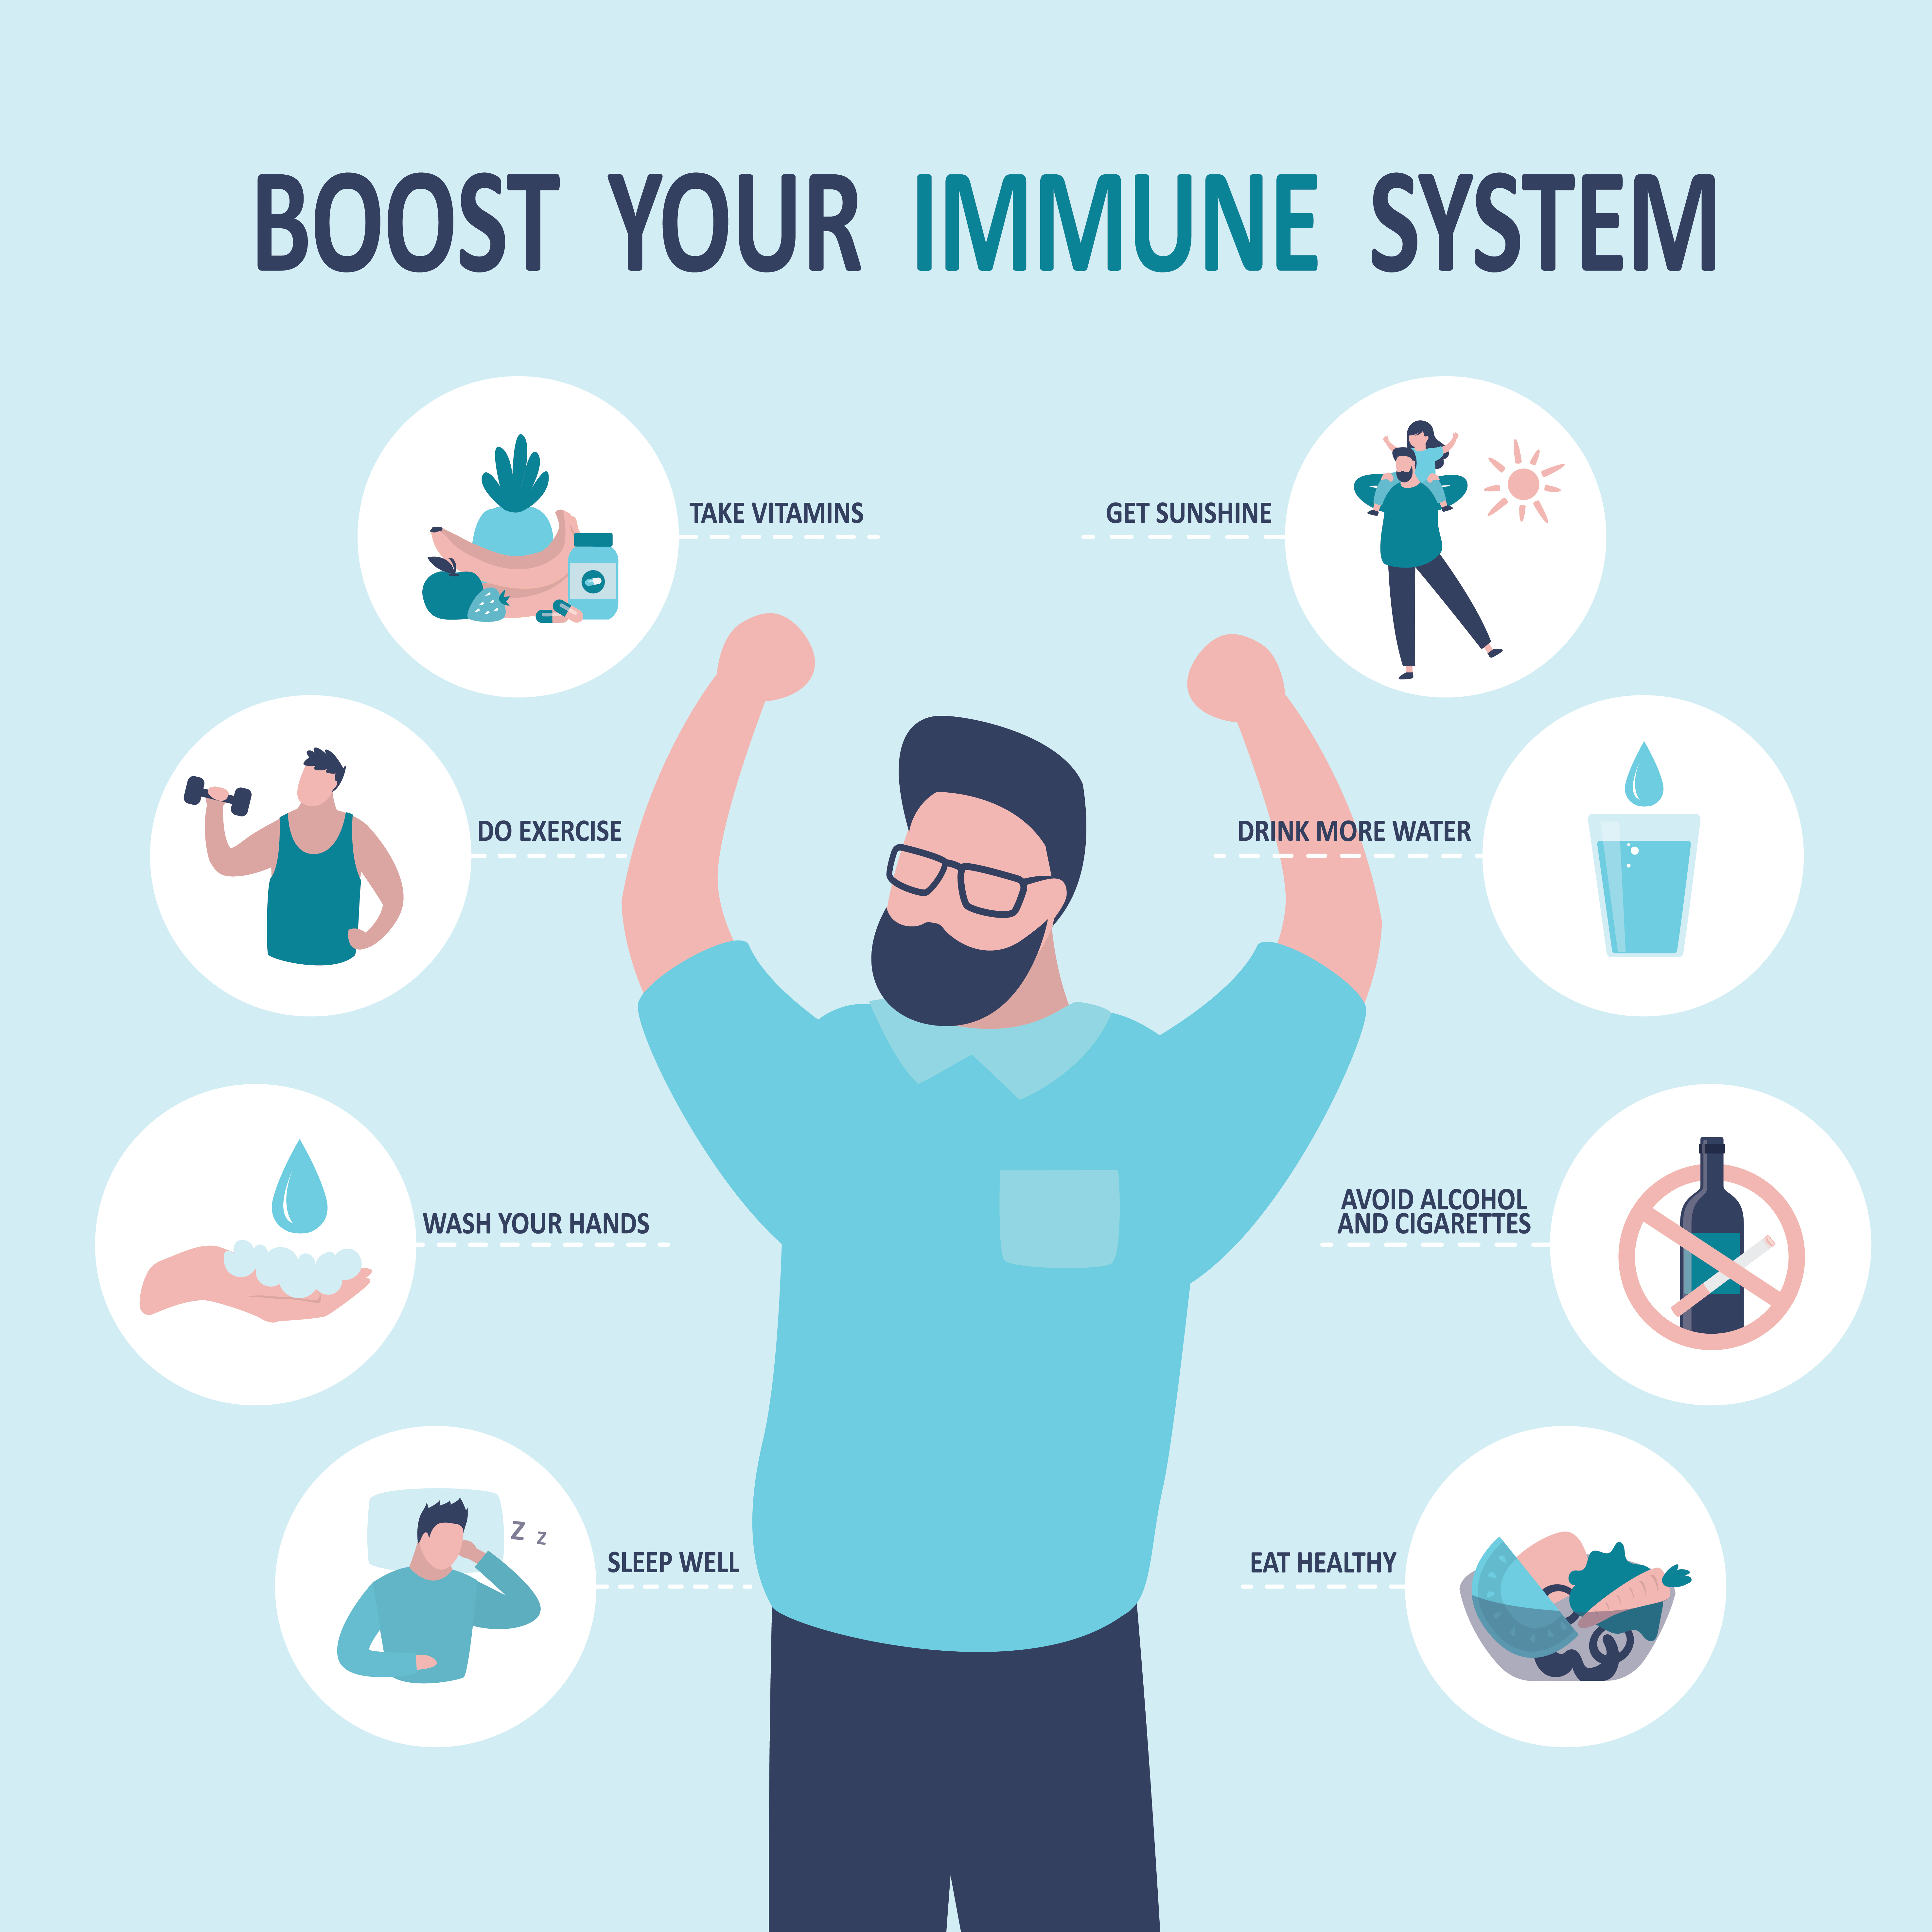 Boost your immune system